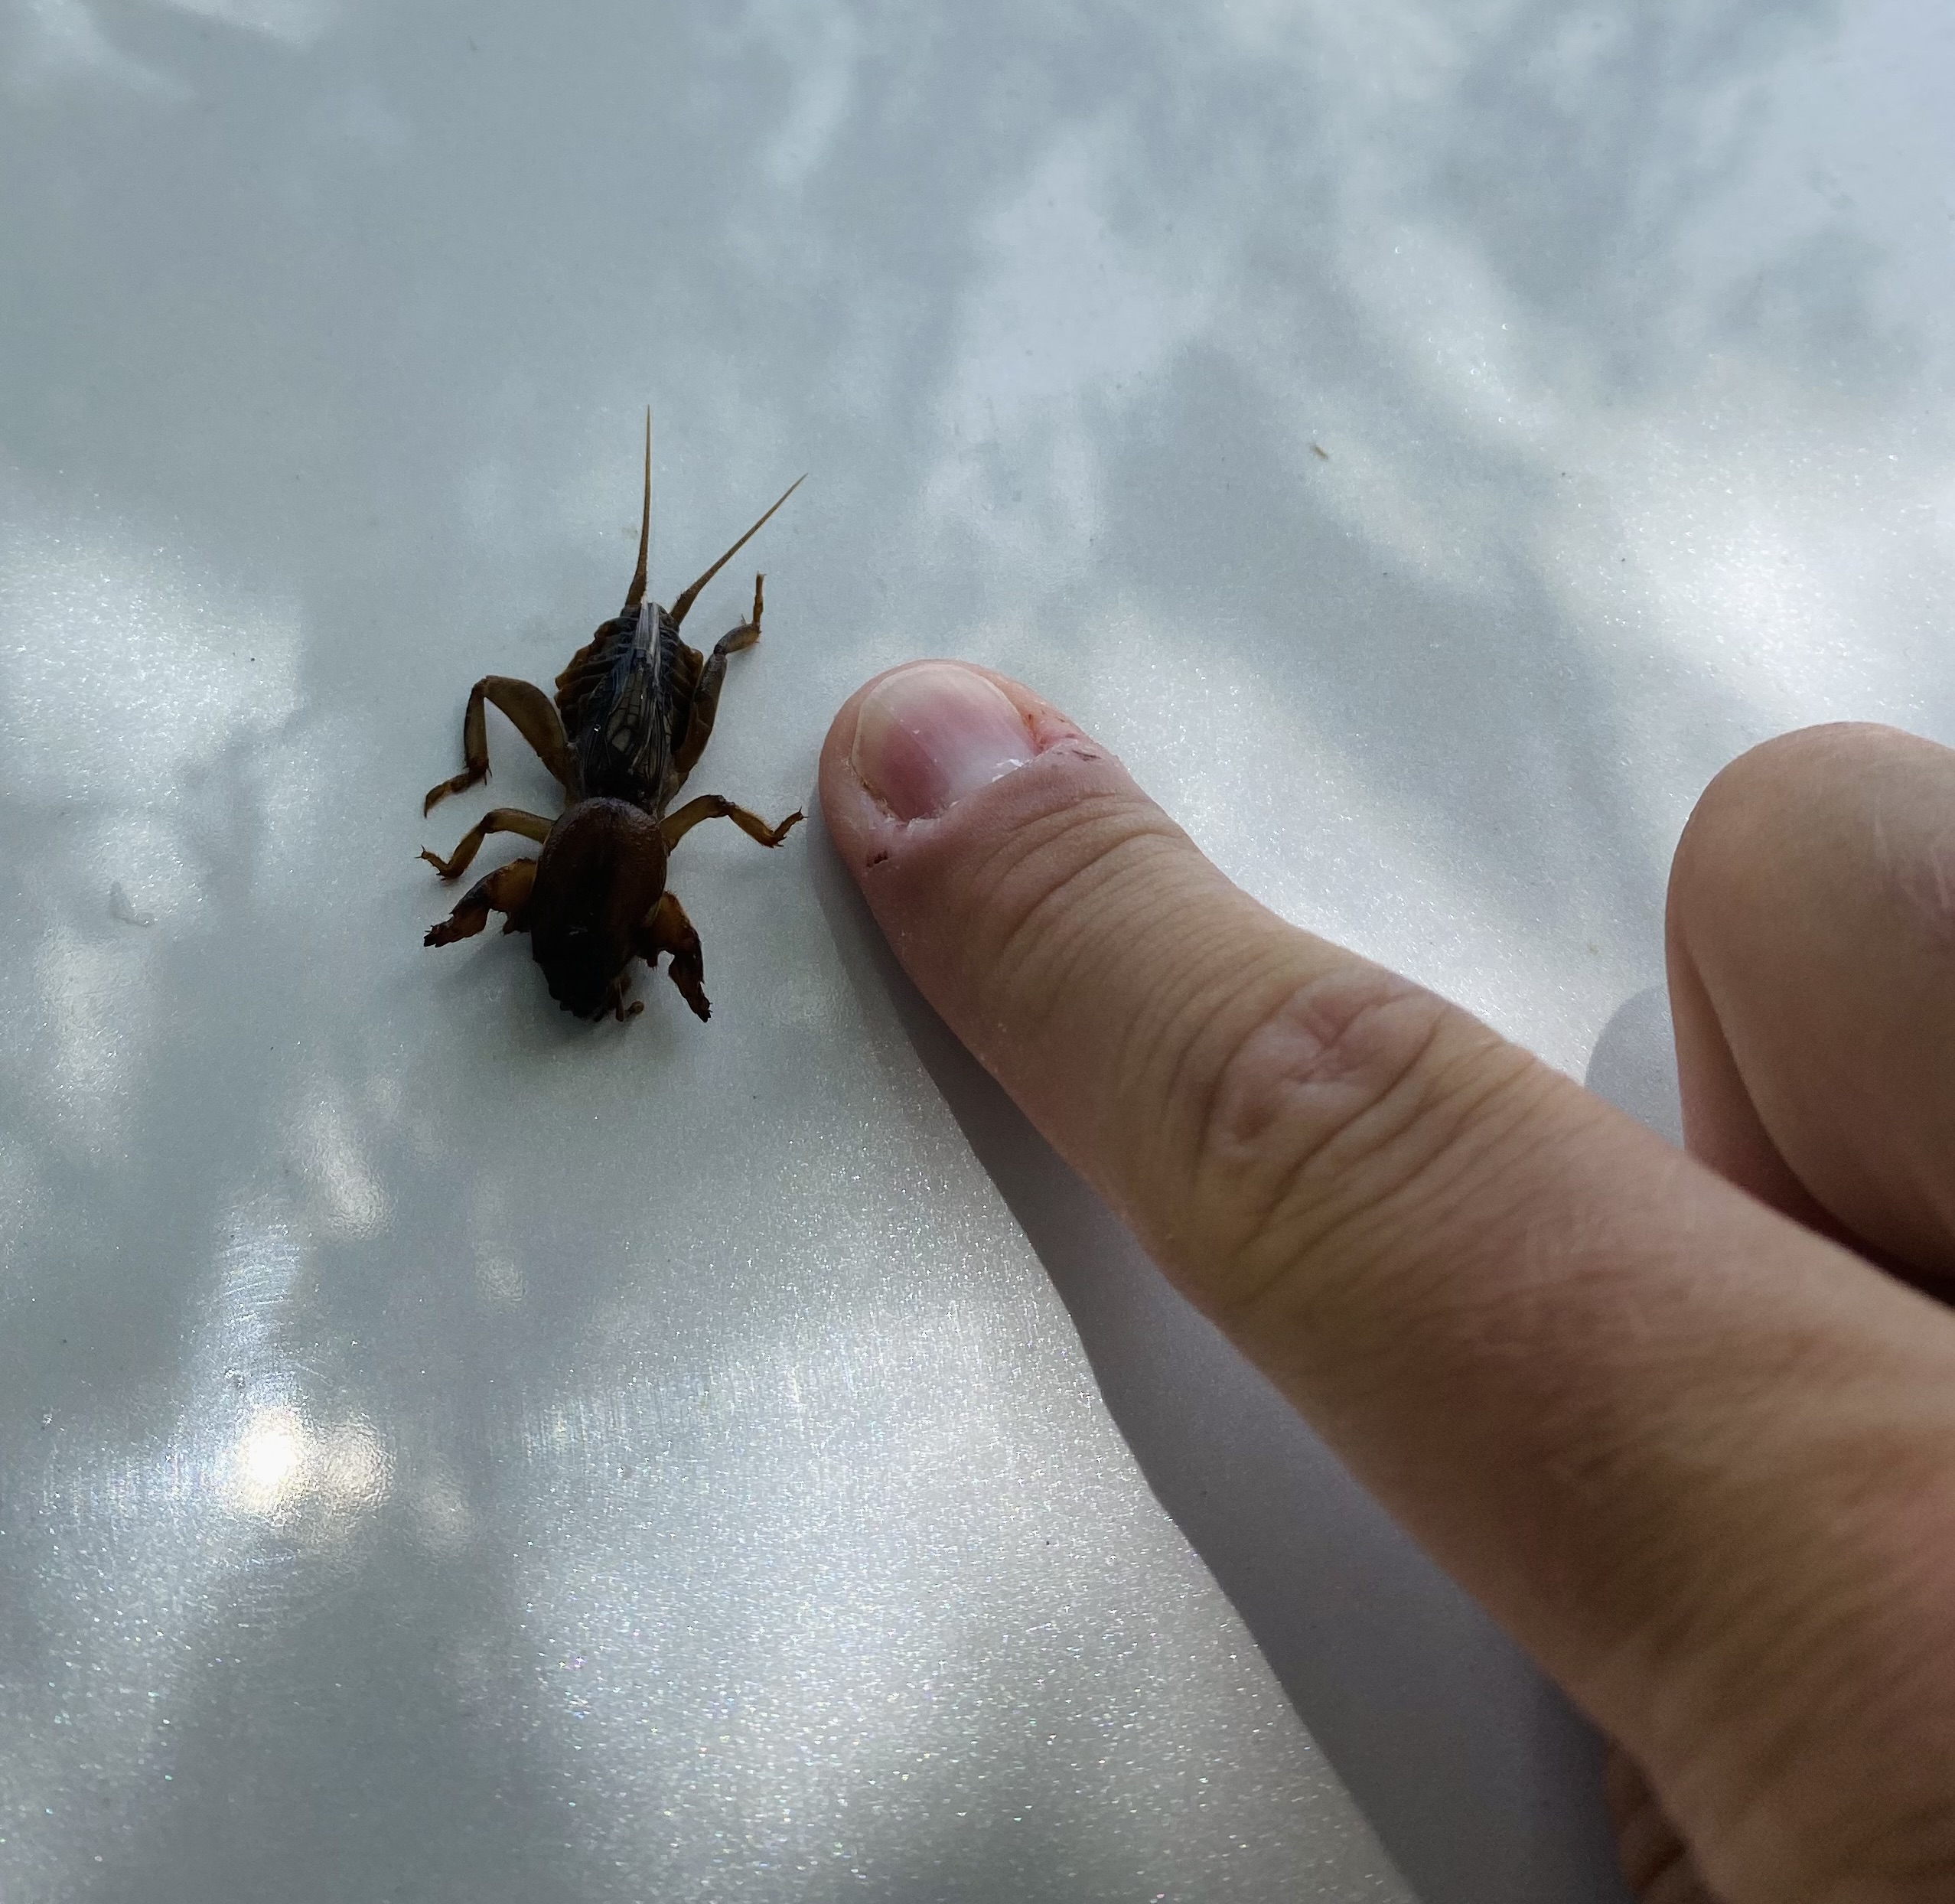 A man's finger pointing to a mole cricket to demonstrate the length (approximately to the first knuckle).